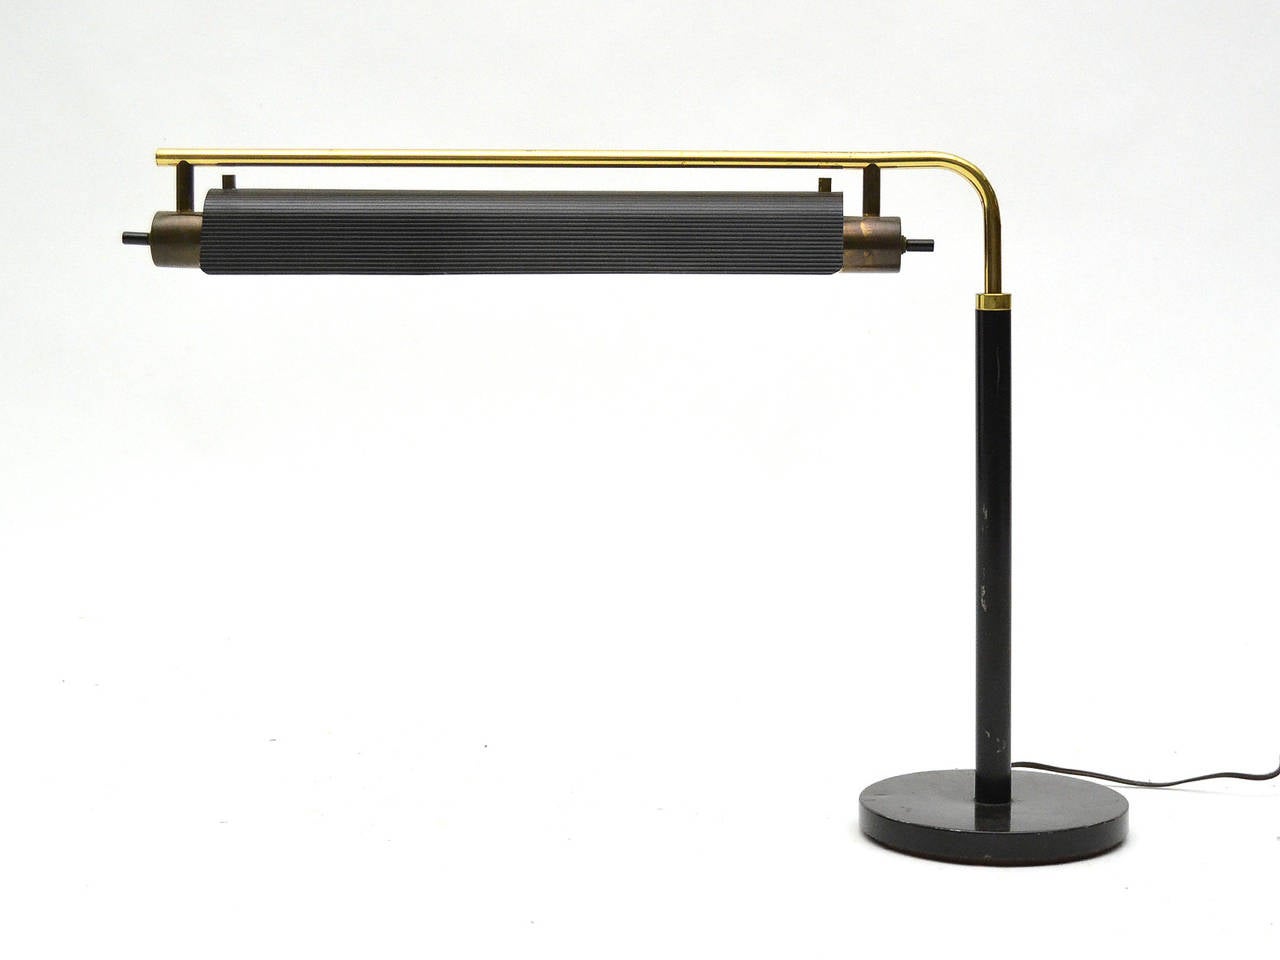 This Gerald Thurston desk or table lamp, has a shade which adjusts in height, swivels, and conceals two cylindrical bulbs which are switched independently. Combining brass and black enameled steel, the lamp has a stately presence.